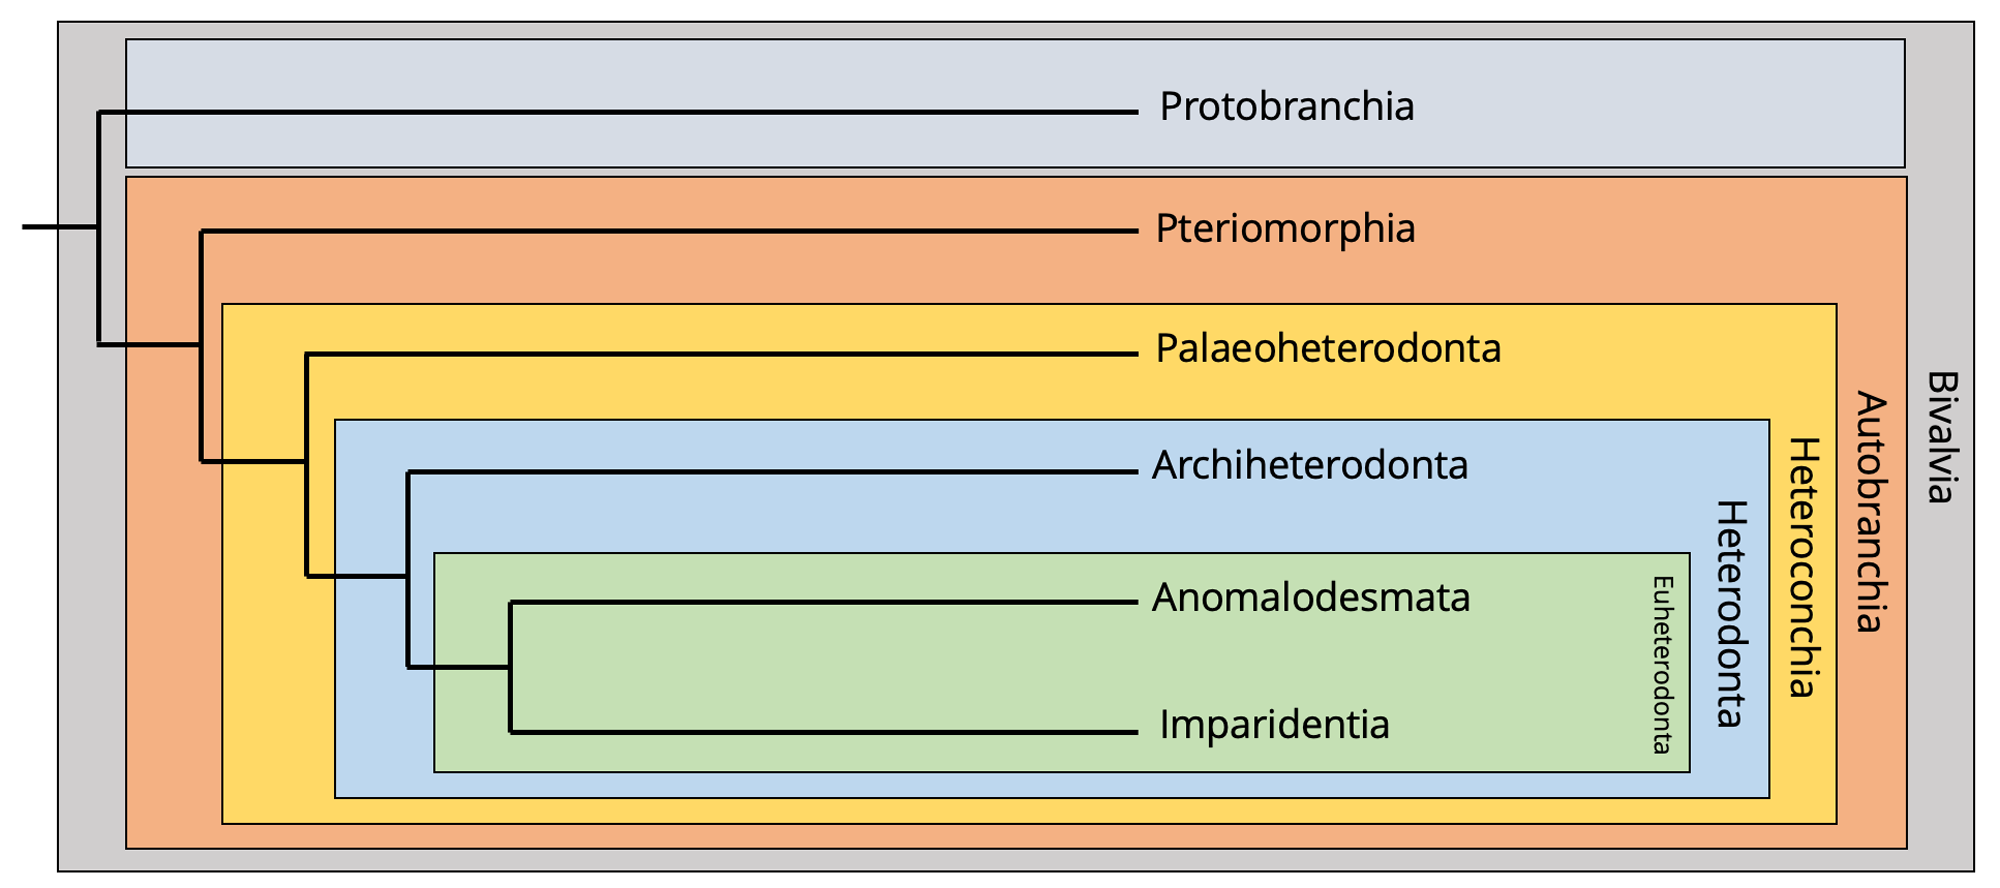 Image showing a phylogeny of bivalves.